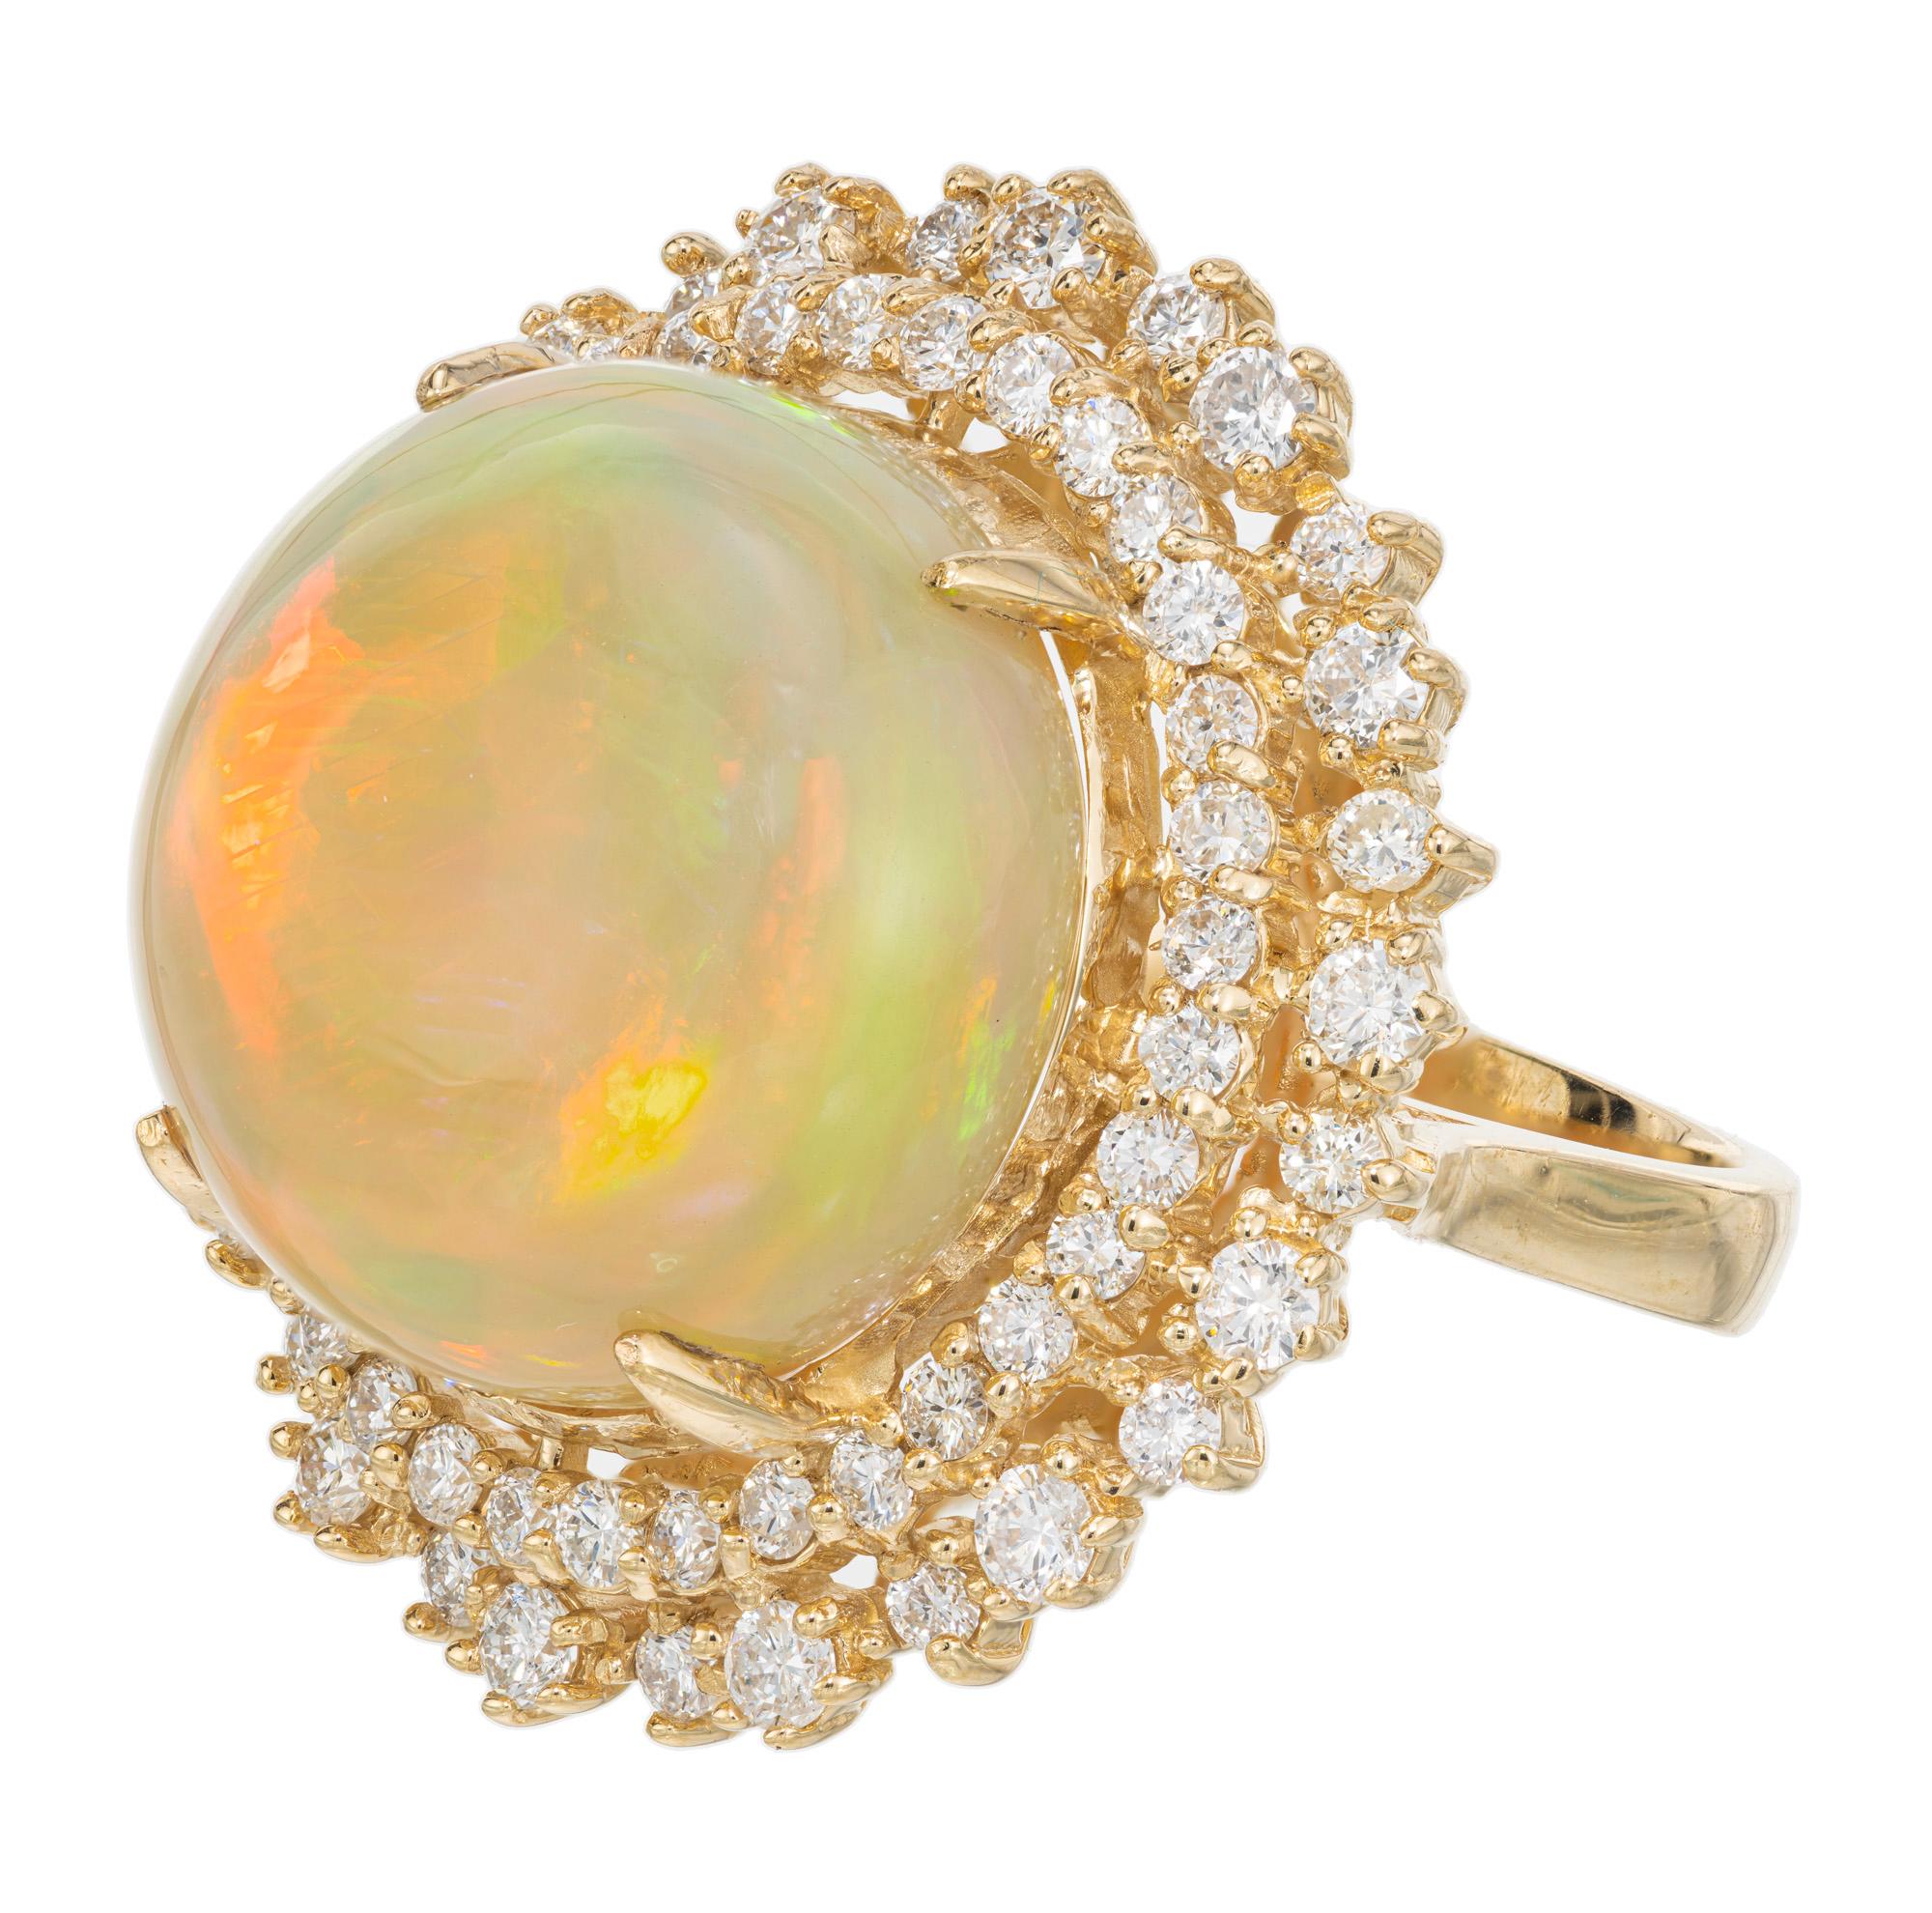 Amazing Ethiopian opal and diamond ring. Spectacular 17 millimeter round high dome cabochon of approximately 18.00 carats, sits in a 14k yellow gold setting with a double halo of round brilliant cut diamonds that approximately total 1.25cts. This